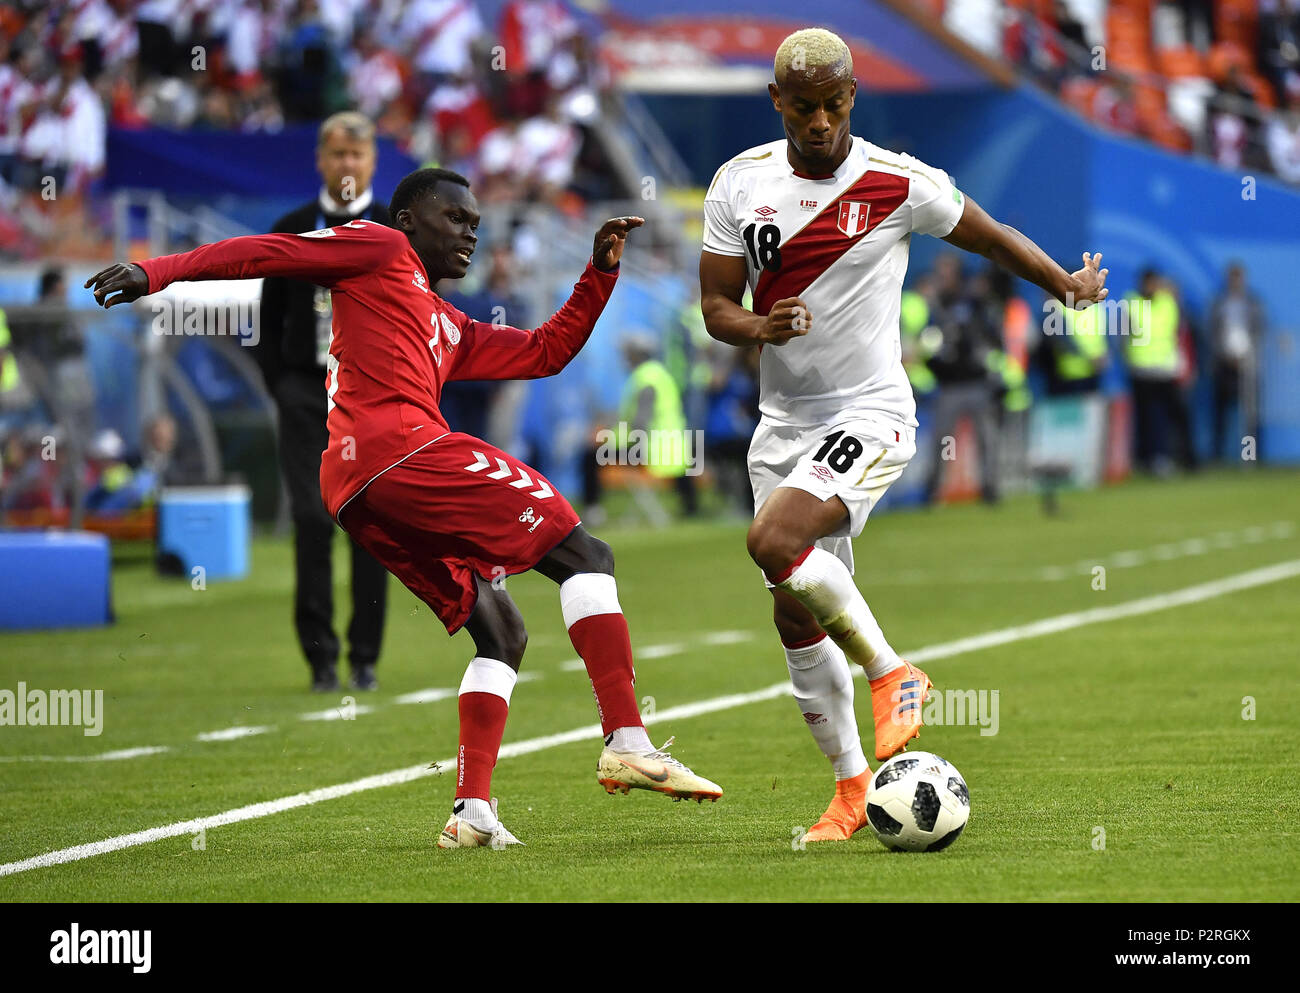 Saransk, Russia. 16th June, 2018. Andre Carrillo (R) of Peru vies with Pione Sisto of Denmark during a group C match between Peru and Denmark at the 2018 FIFA World Cup in Saransk, Russia, June 16, 2018. Denmark won 1-0. Credit: He Canling/Xinhua/Alamy Live News Stock Photo